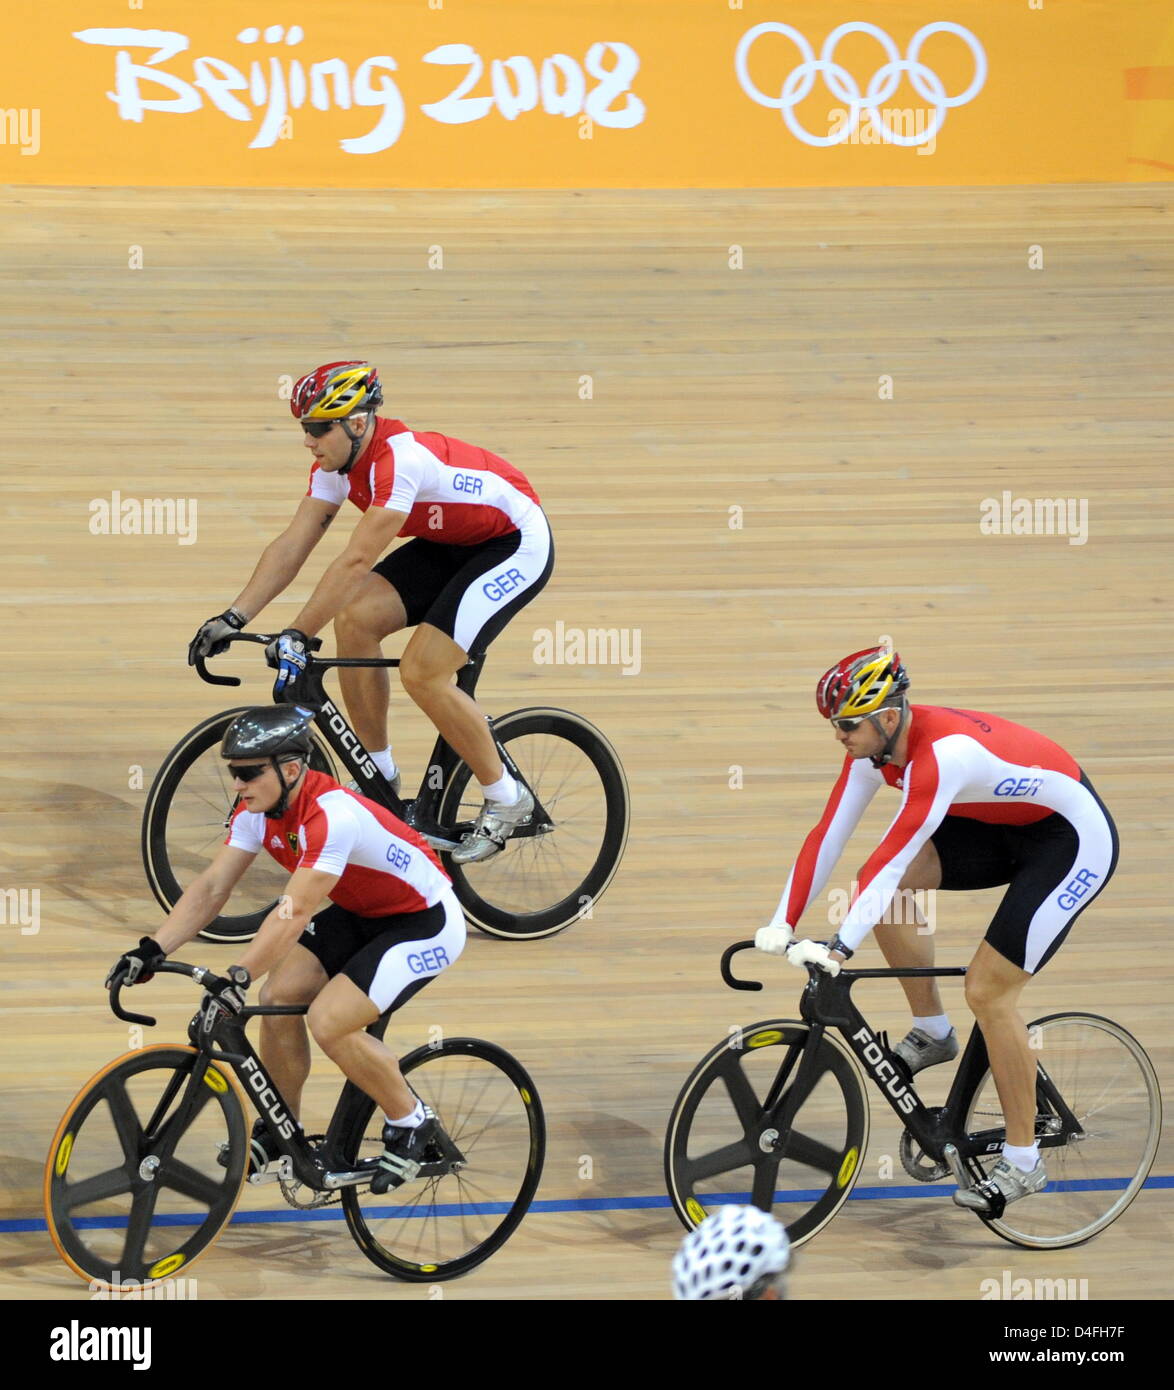 Rene Enders (L-R), Maximilian Levy and Carsten Bergemann of the German track cycling team trains in the Laoshan Velodrome in preparation of the Beijing 2008 Olympic Games, Beijing, China, 7 August 2008. Photo: Peer Grimm (c) dpa - Bildfunk Stock Photo